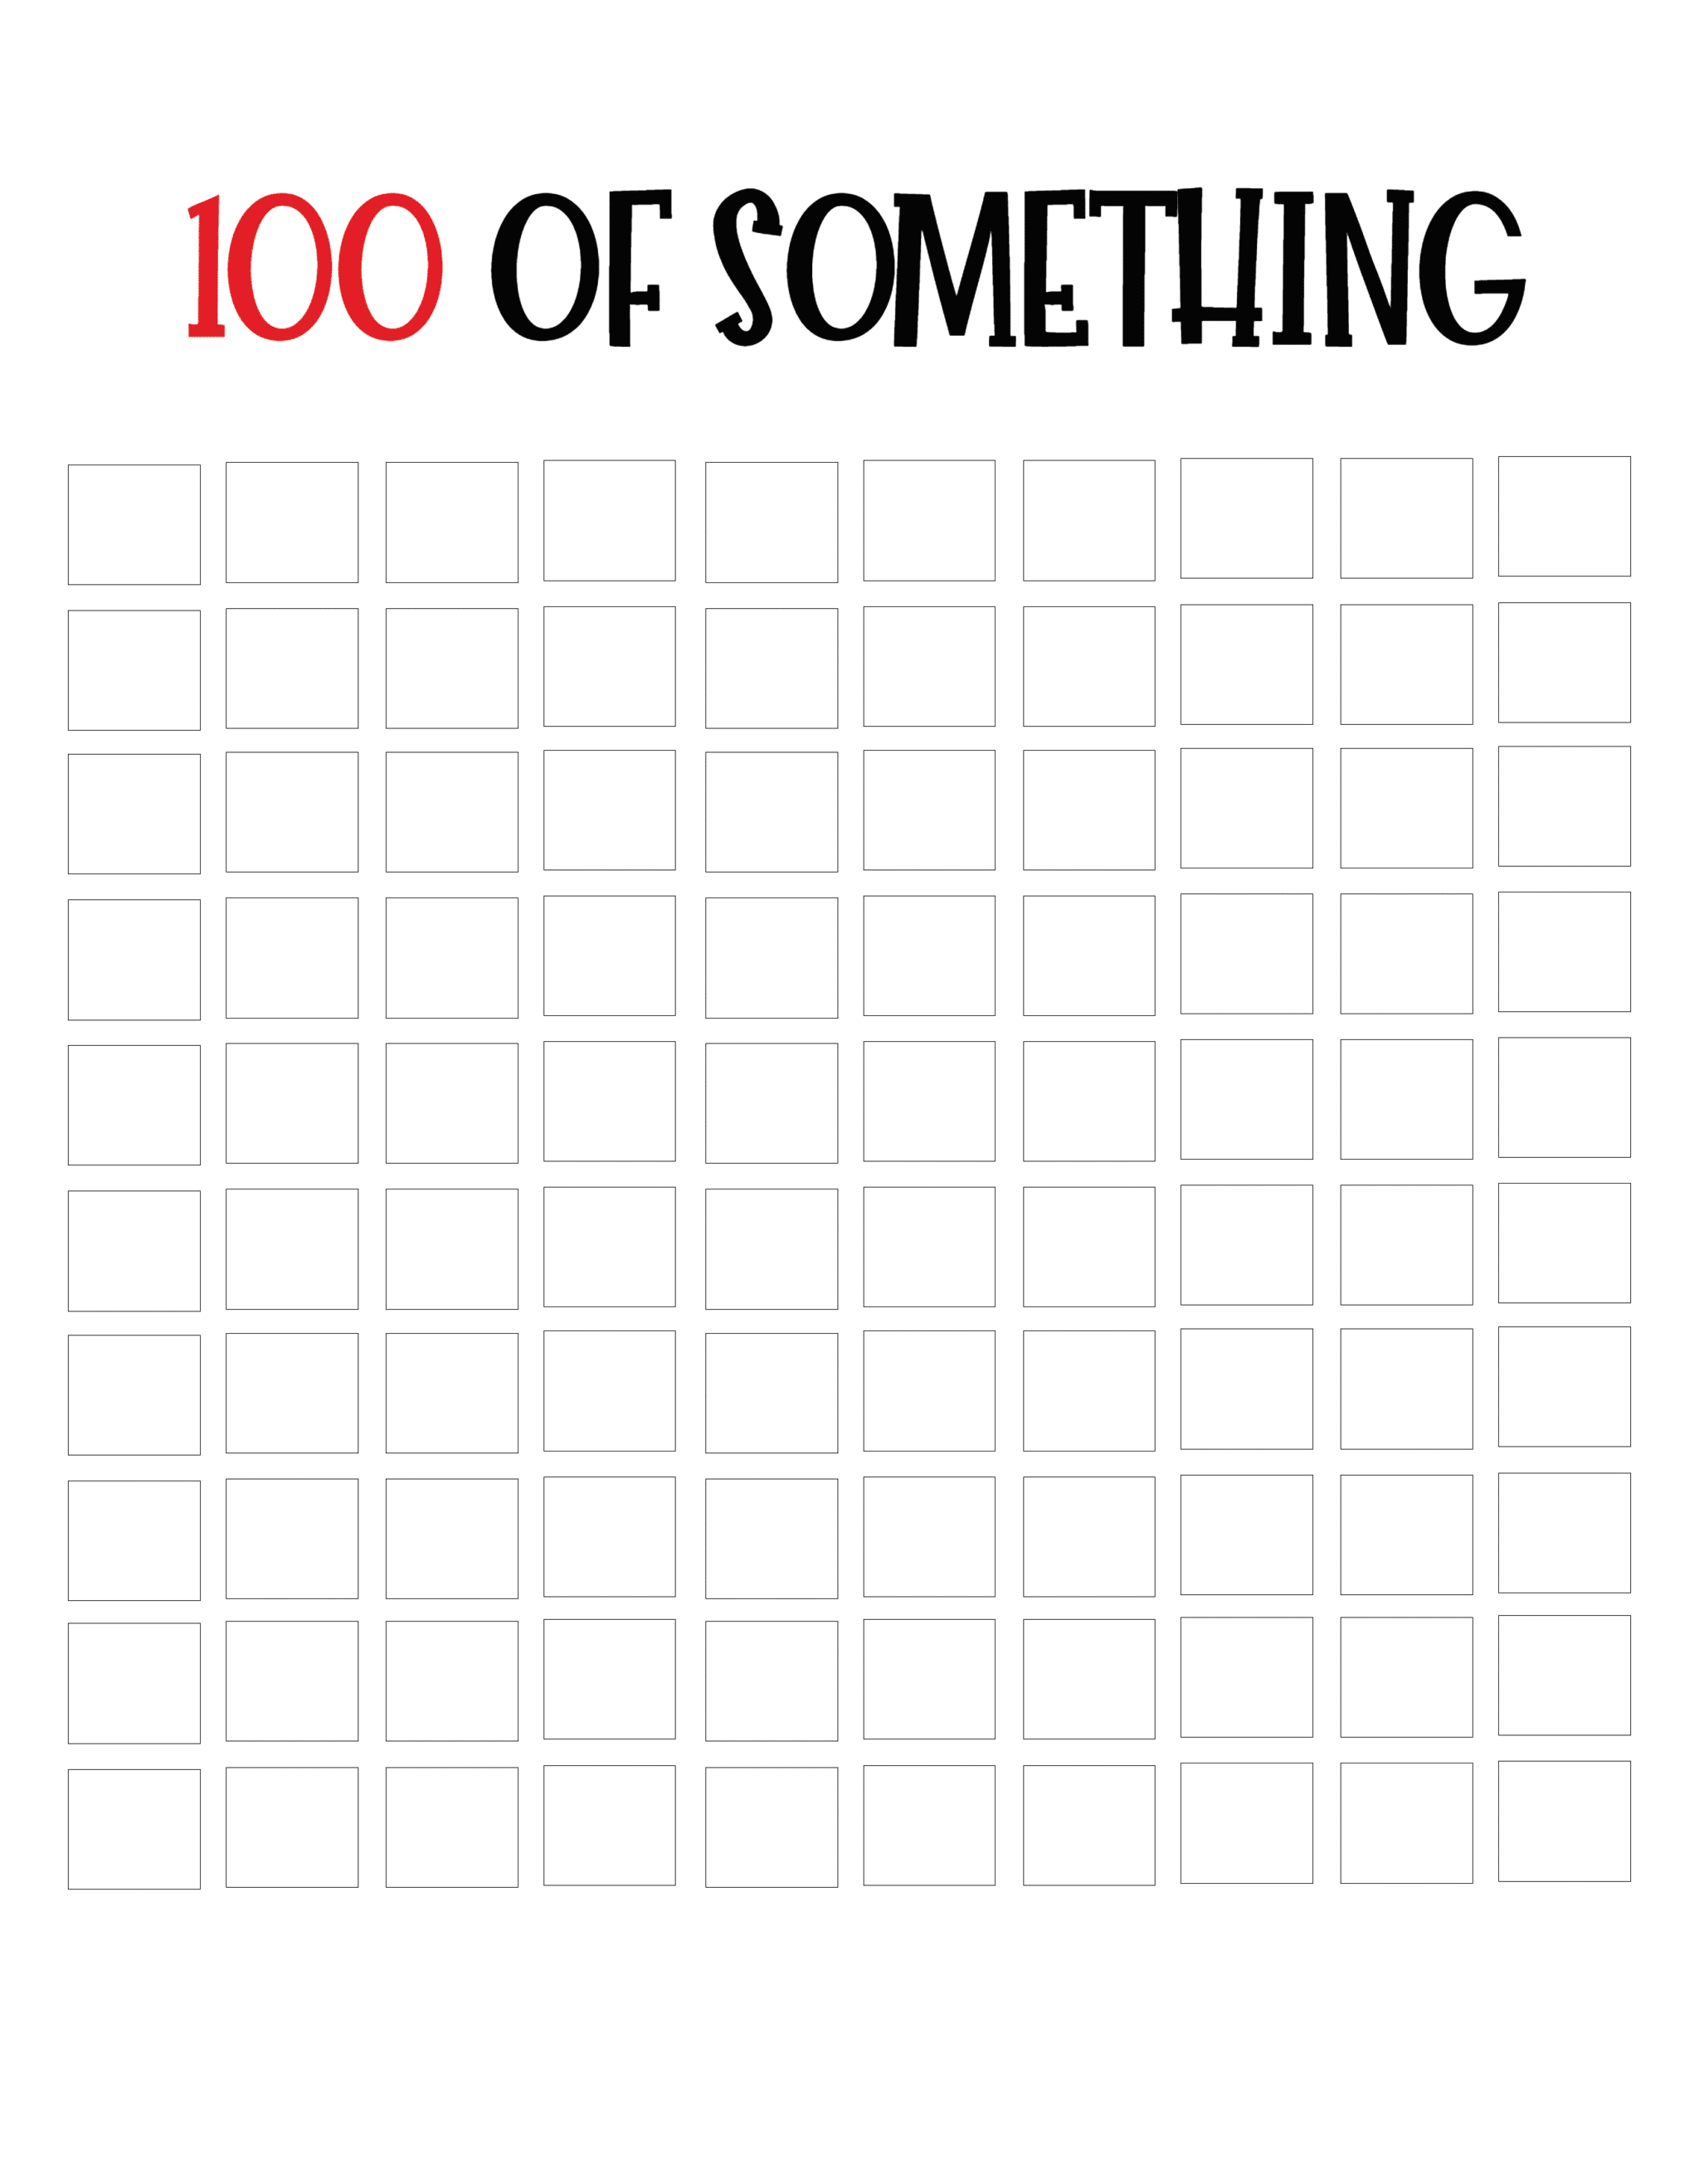 100 of something printable grids